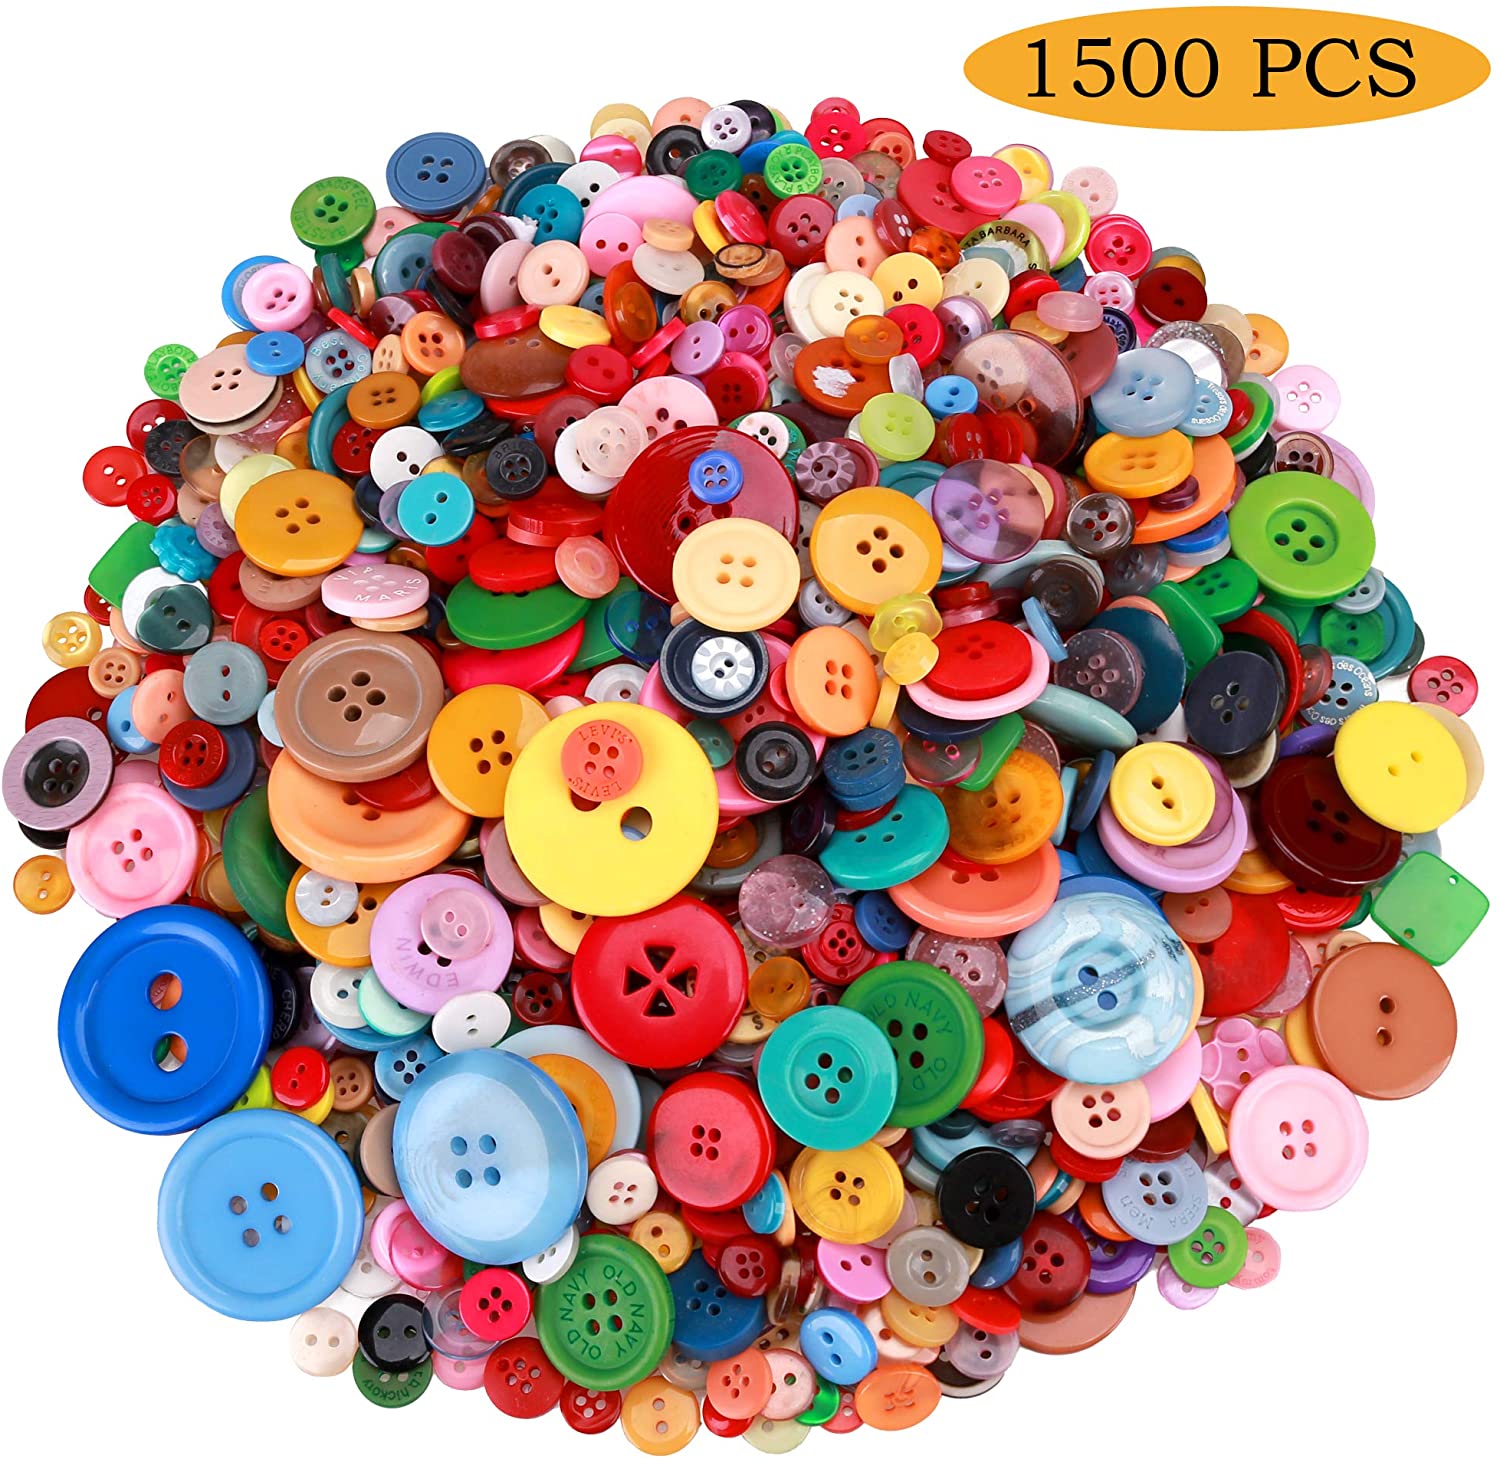 GIXUSIL 1200 Pcs Assorted Bulk Buttons Mixed Colors Size Buttons for Crafts,Round  Craft Buttons for Sewing DIY Crafts，Children's Manual Button Painting 2  Holes and 4 Holes,Plastic 